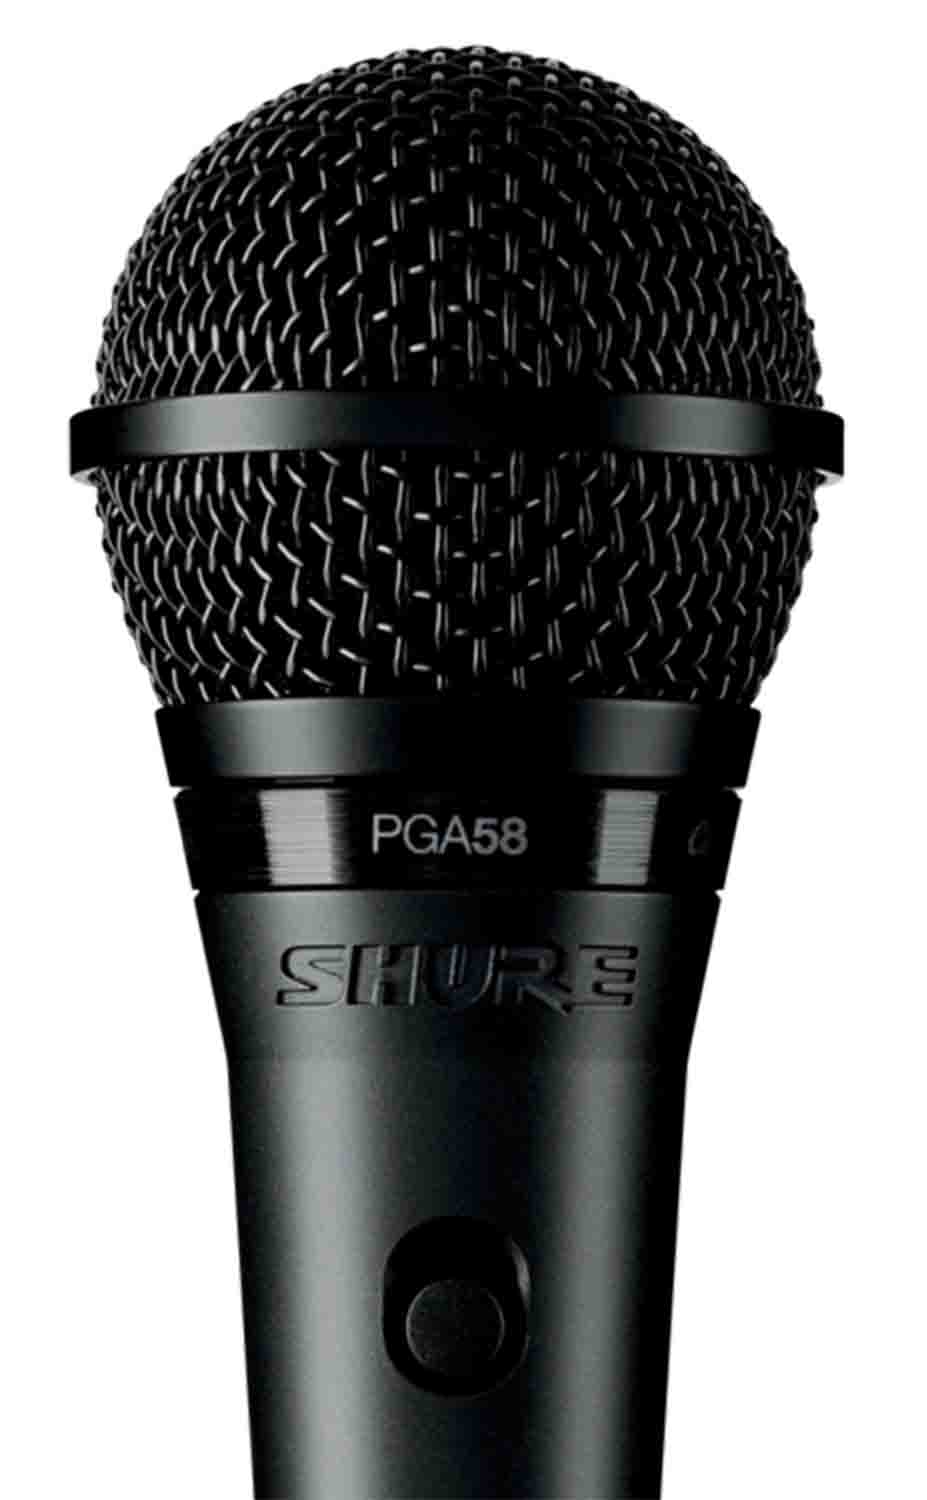 B-Stock: Shure PGA58 Cardioid Dynamic Vocal Microphone by Shure